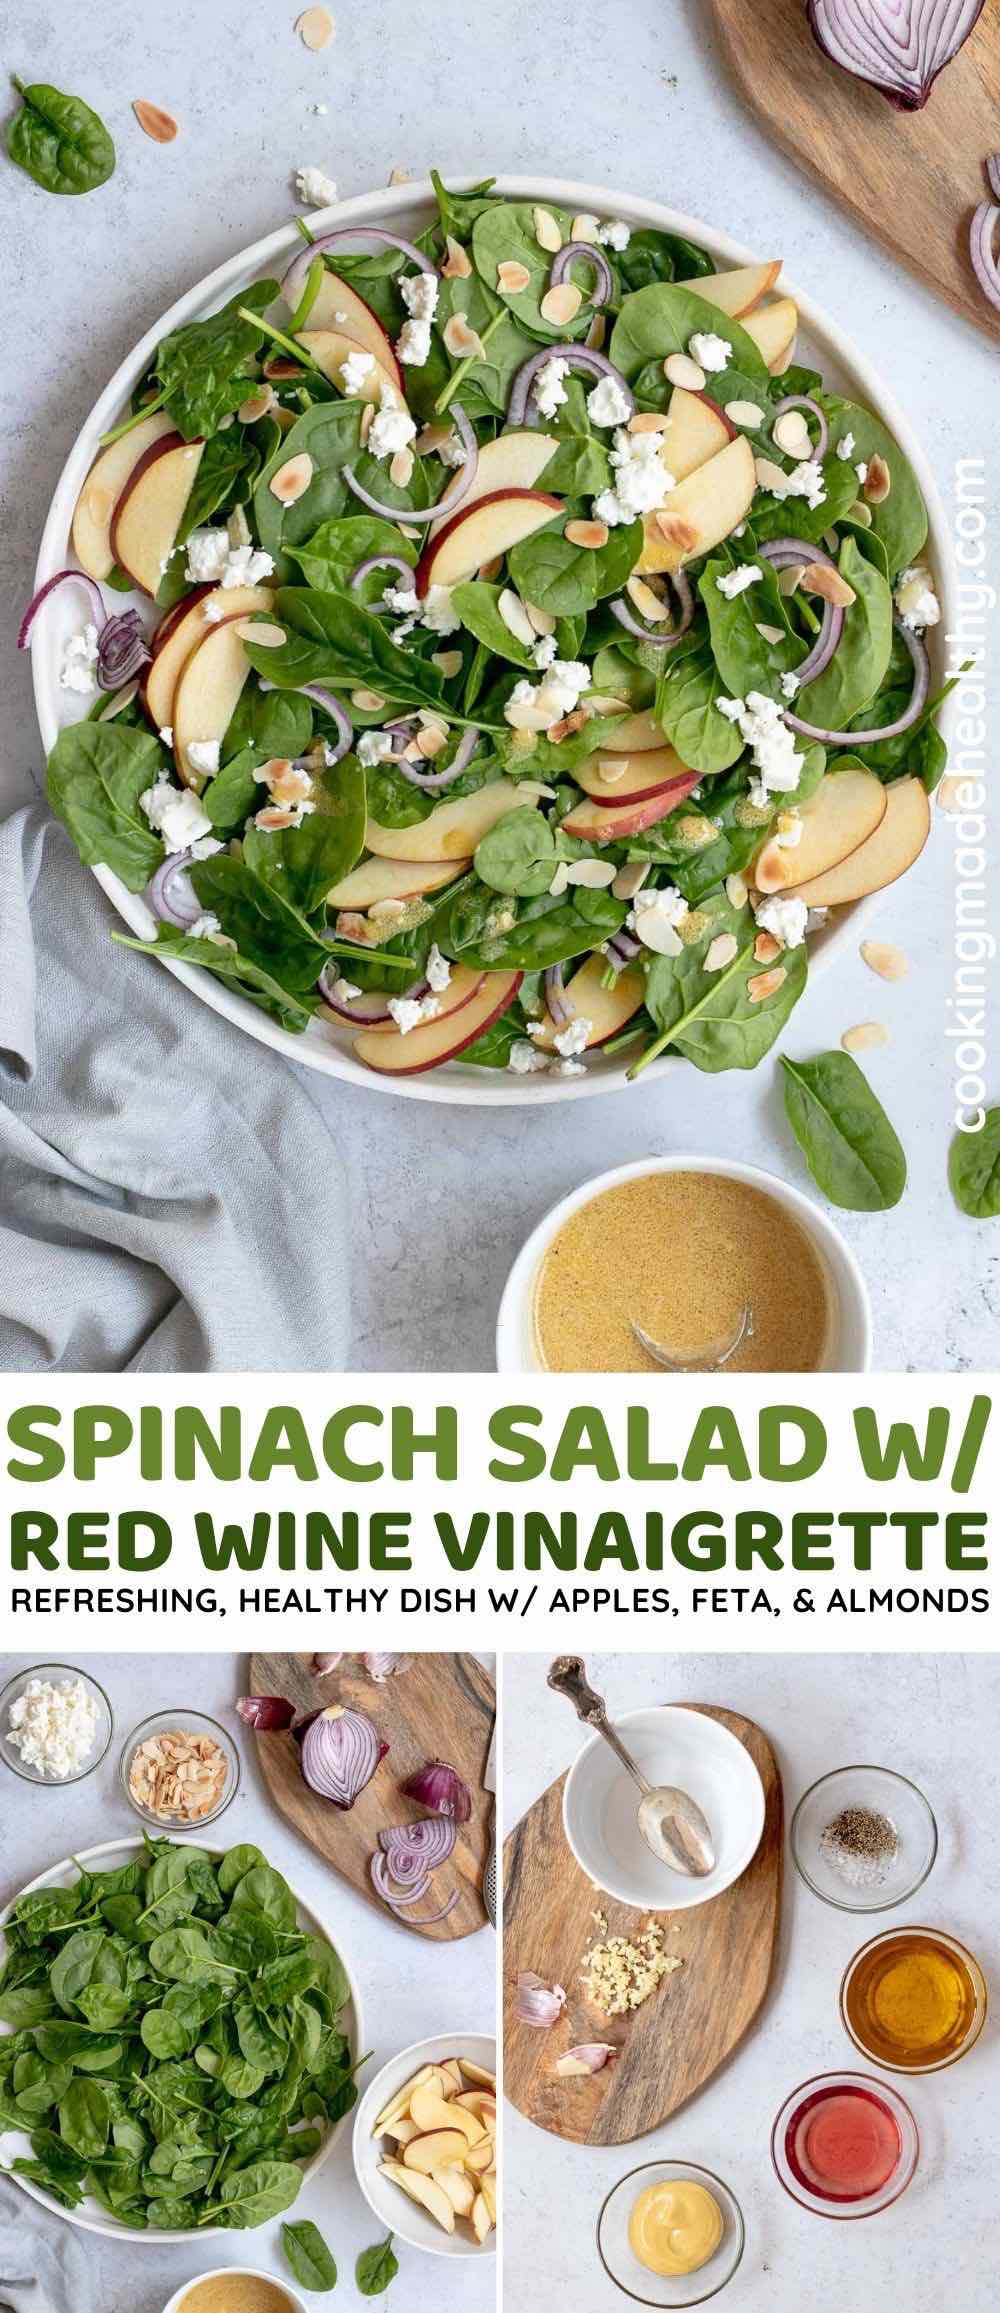 Spinach Salad with Red Wine Vinaigrette collage